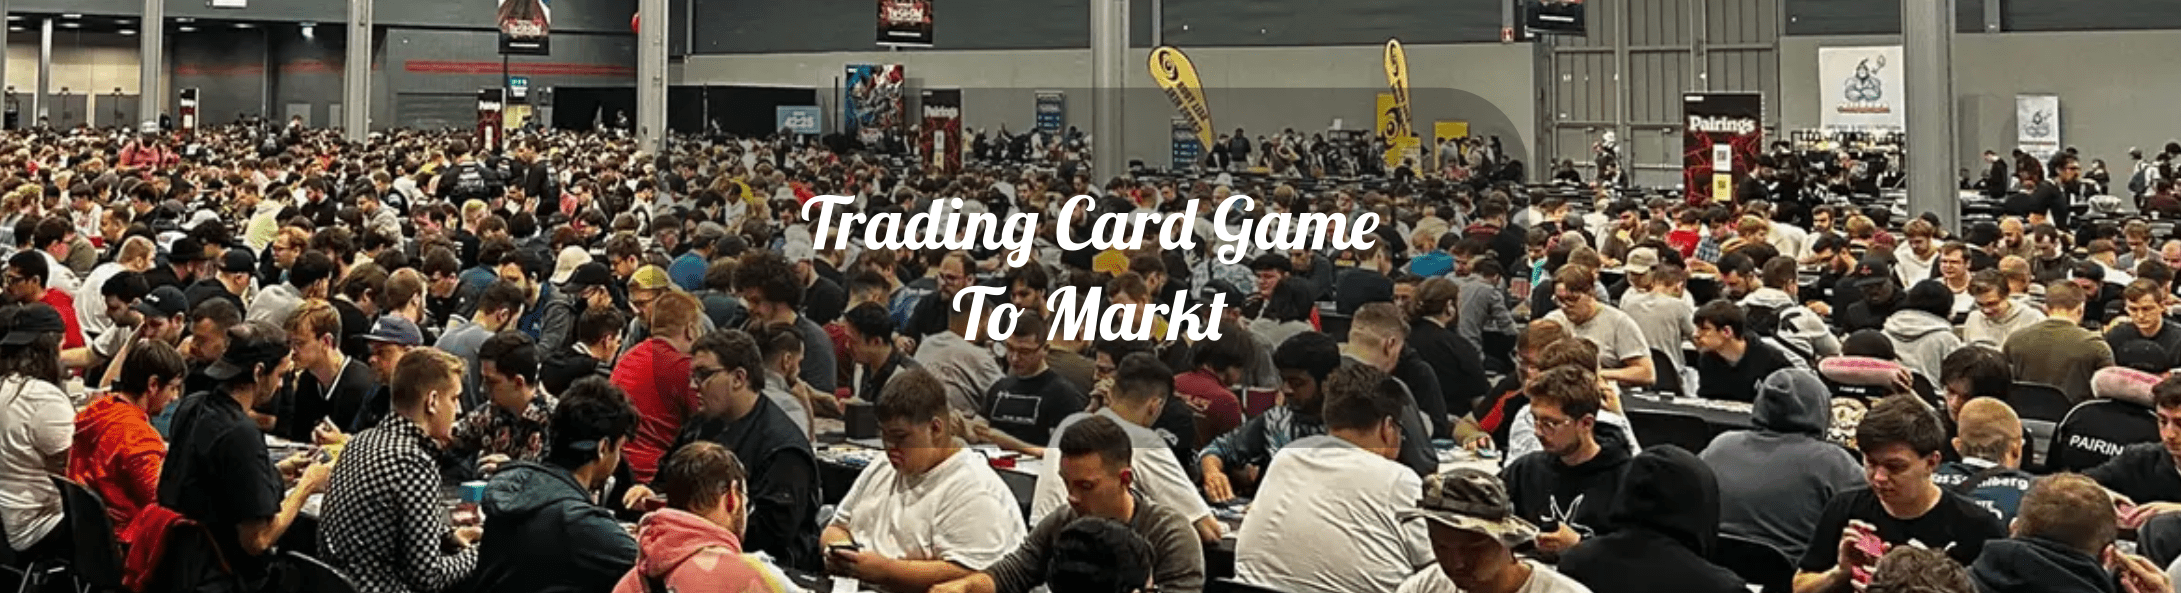 How to Launch e new Trading Card Game